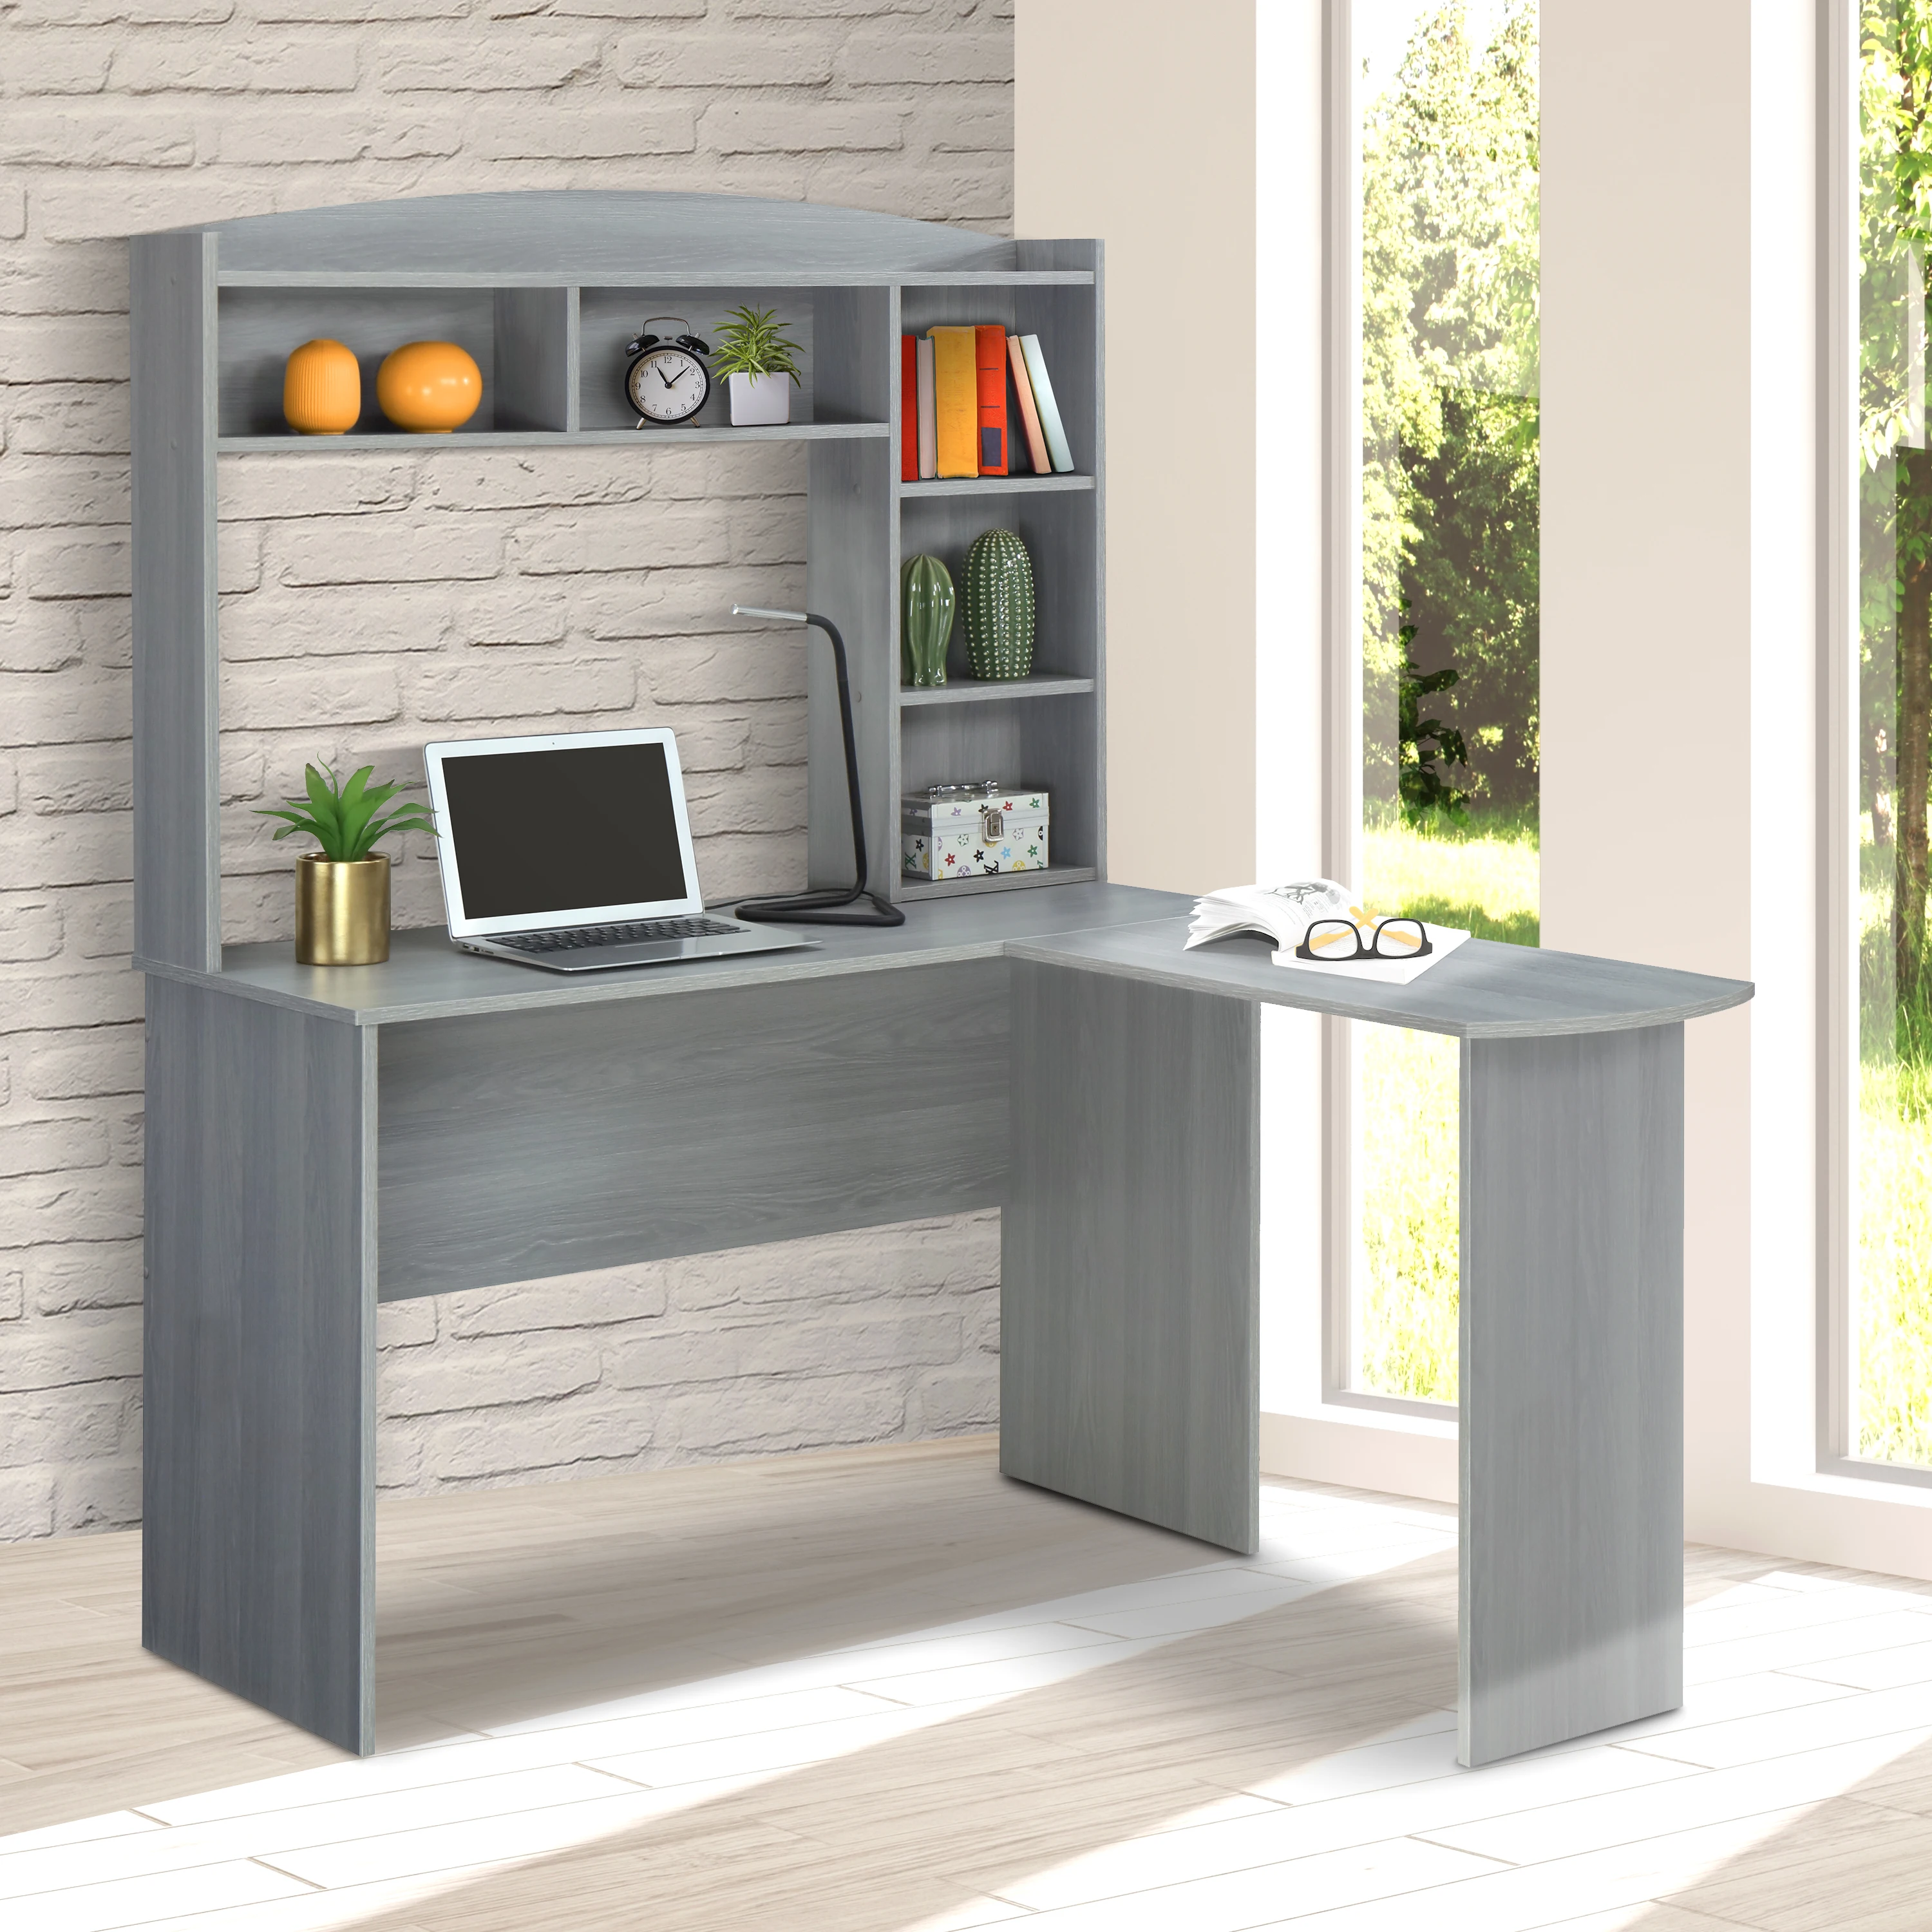 Modern Wood L-Shaped Computer Desk with Hutch Office Study Table Grey[US-W] outdoor rabbit hutch 3 doors brown wood